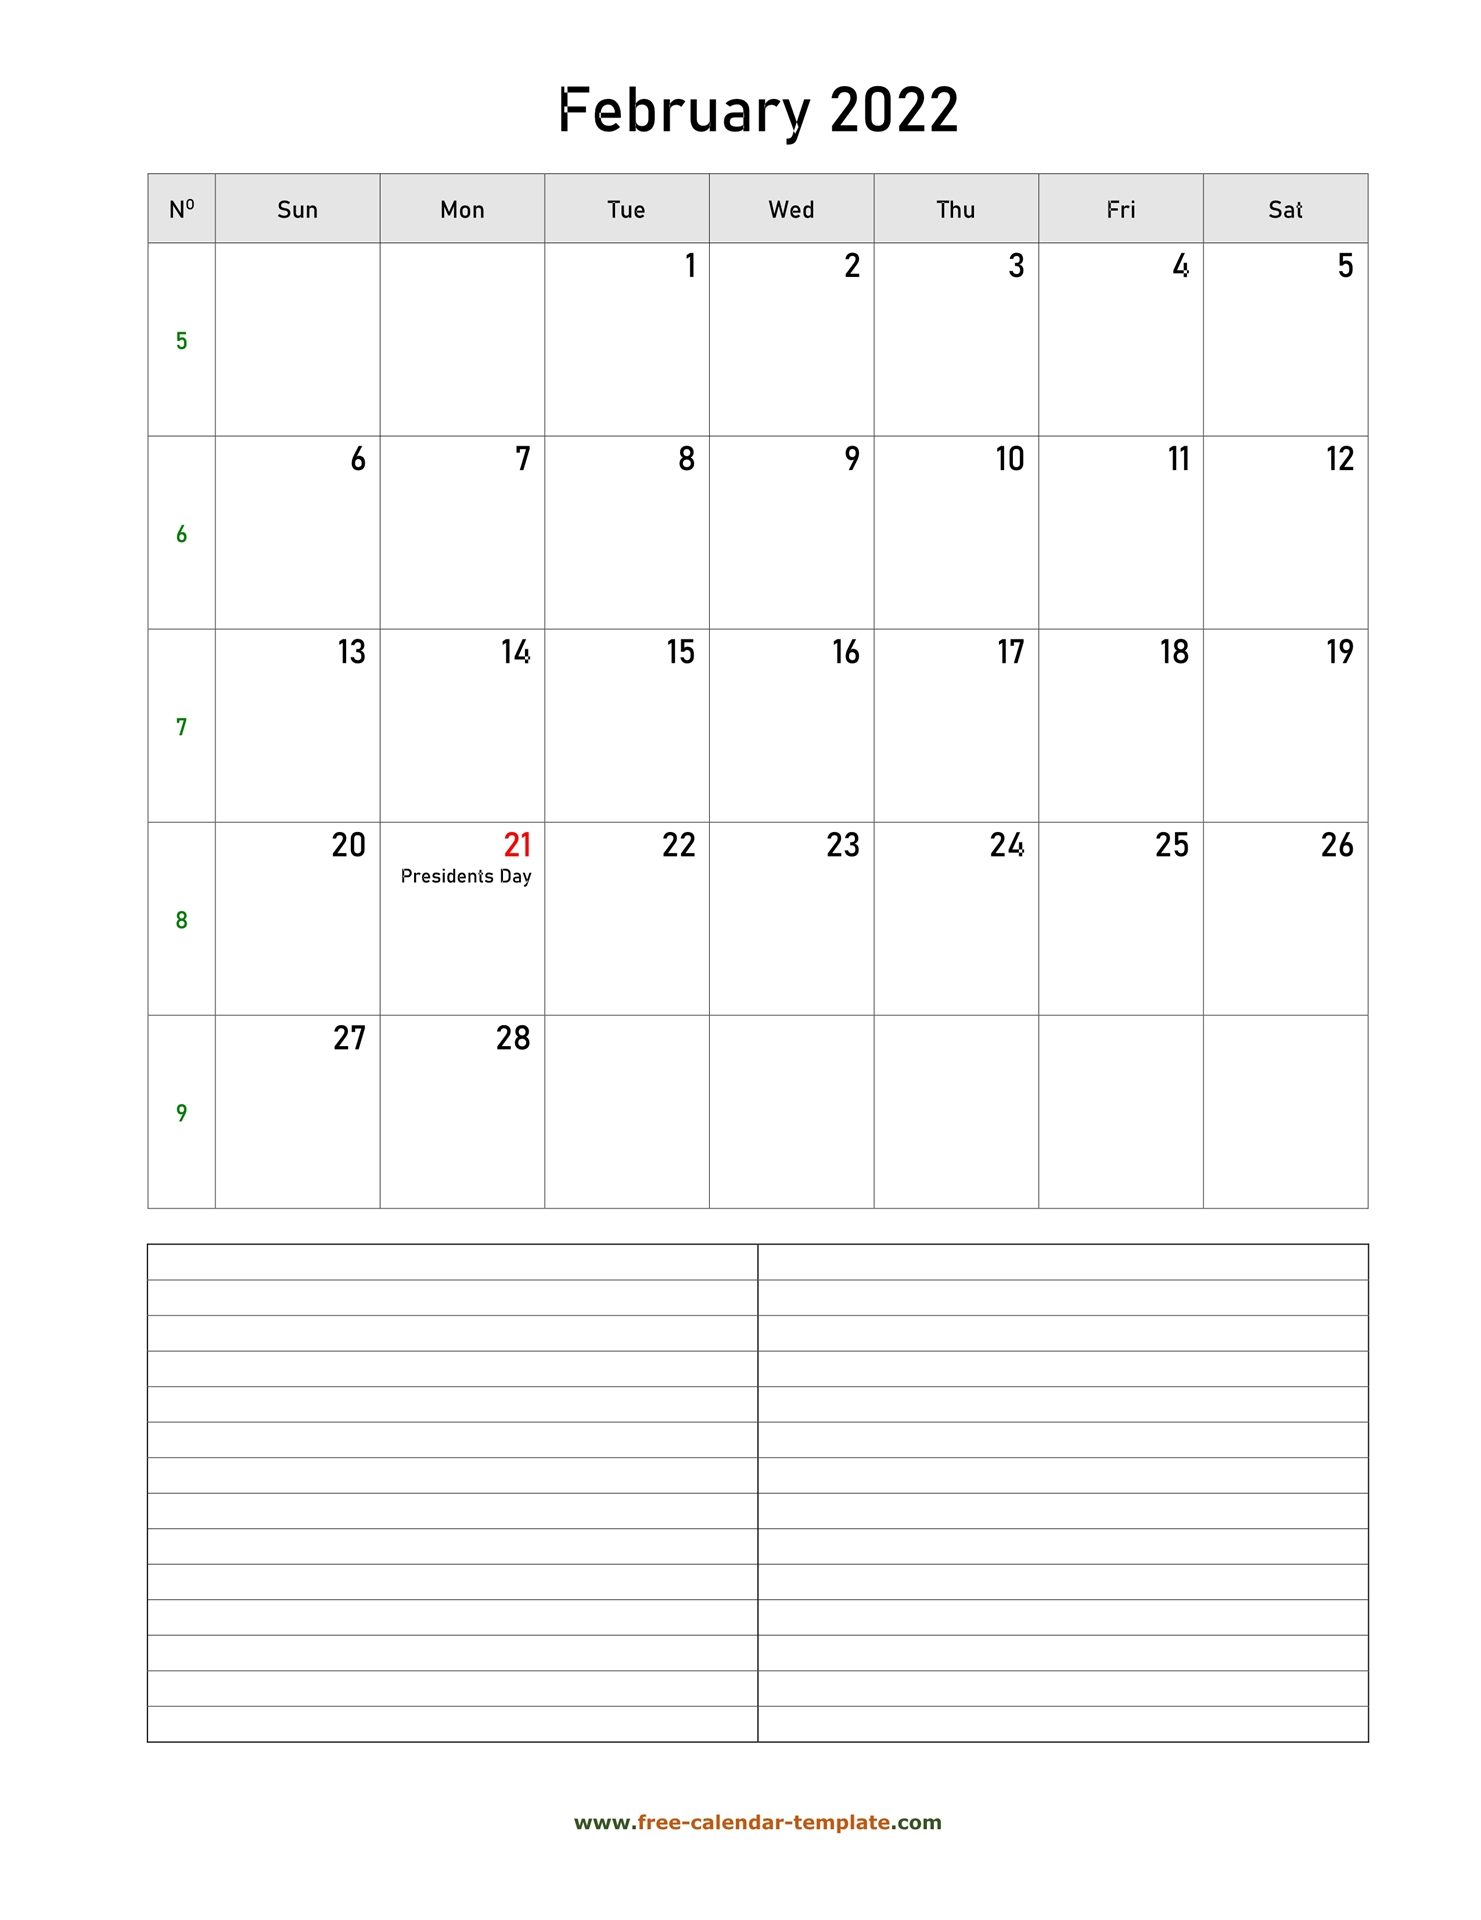 Printable February 2022 Calendar With Space For Appointments (Vertical) | Free-Calendar-Template